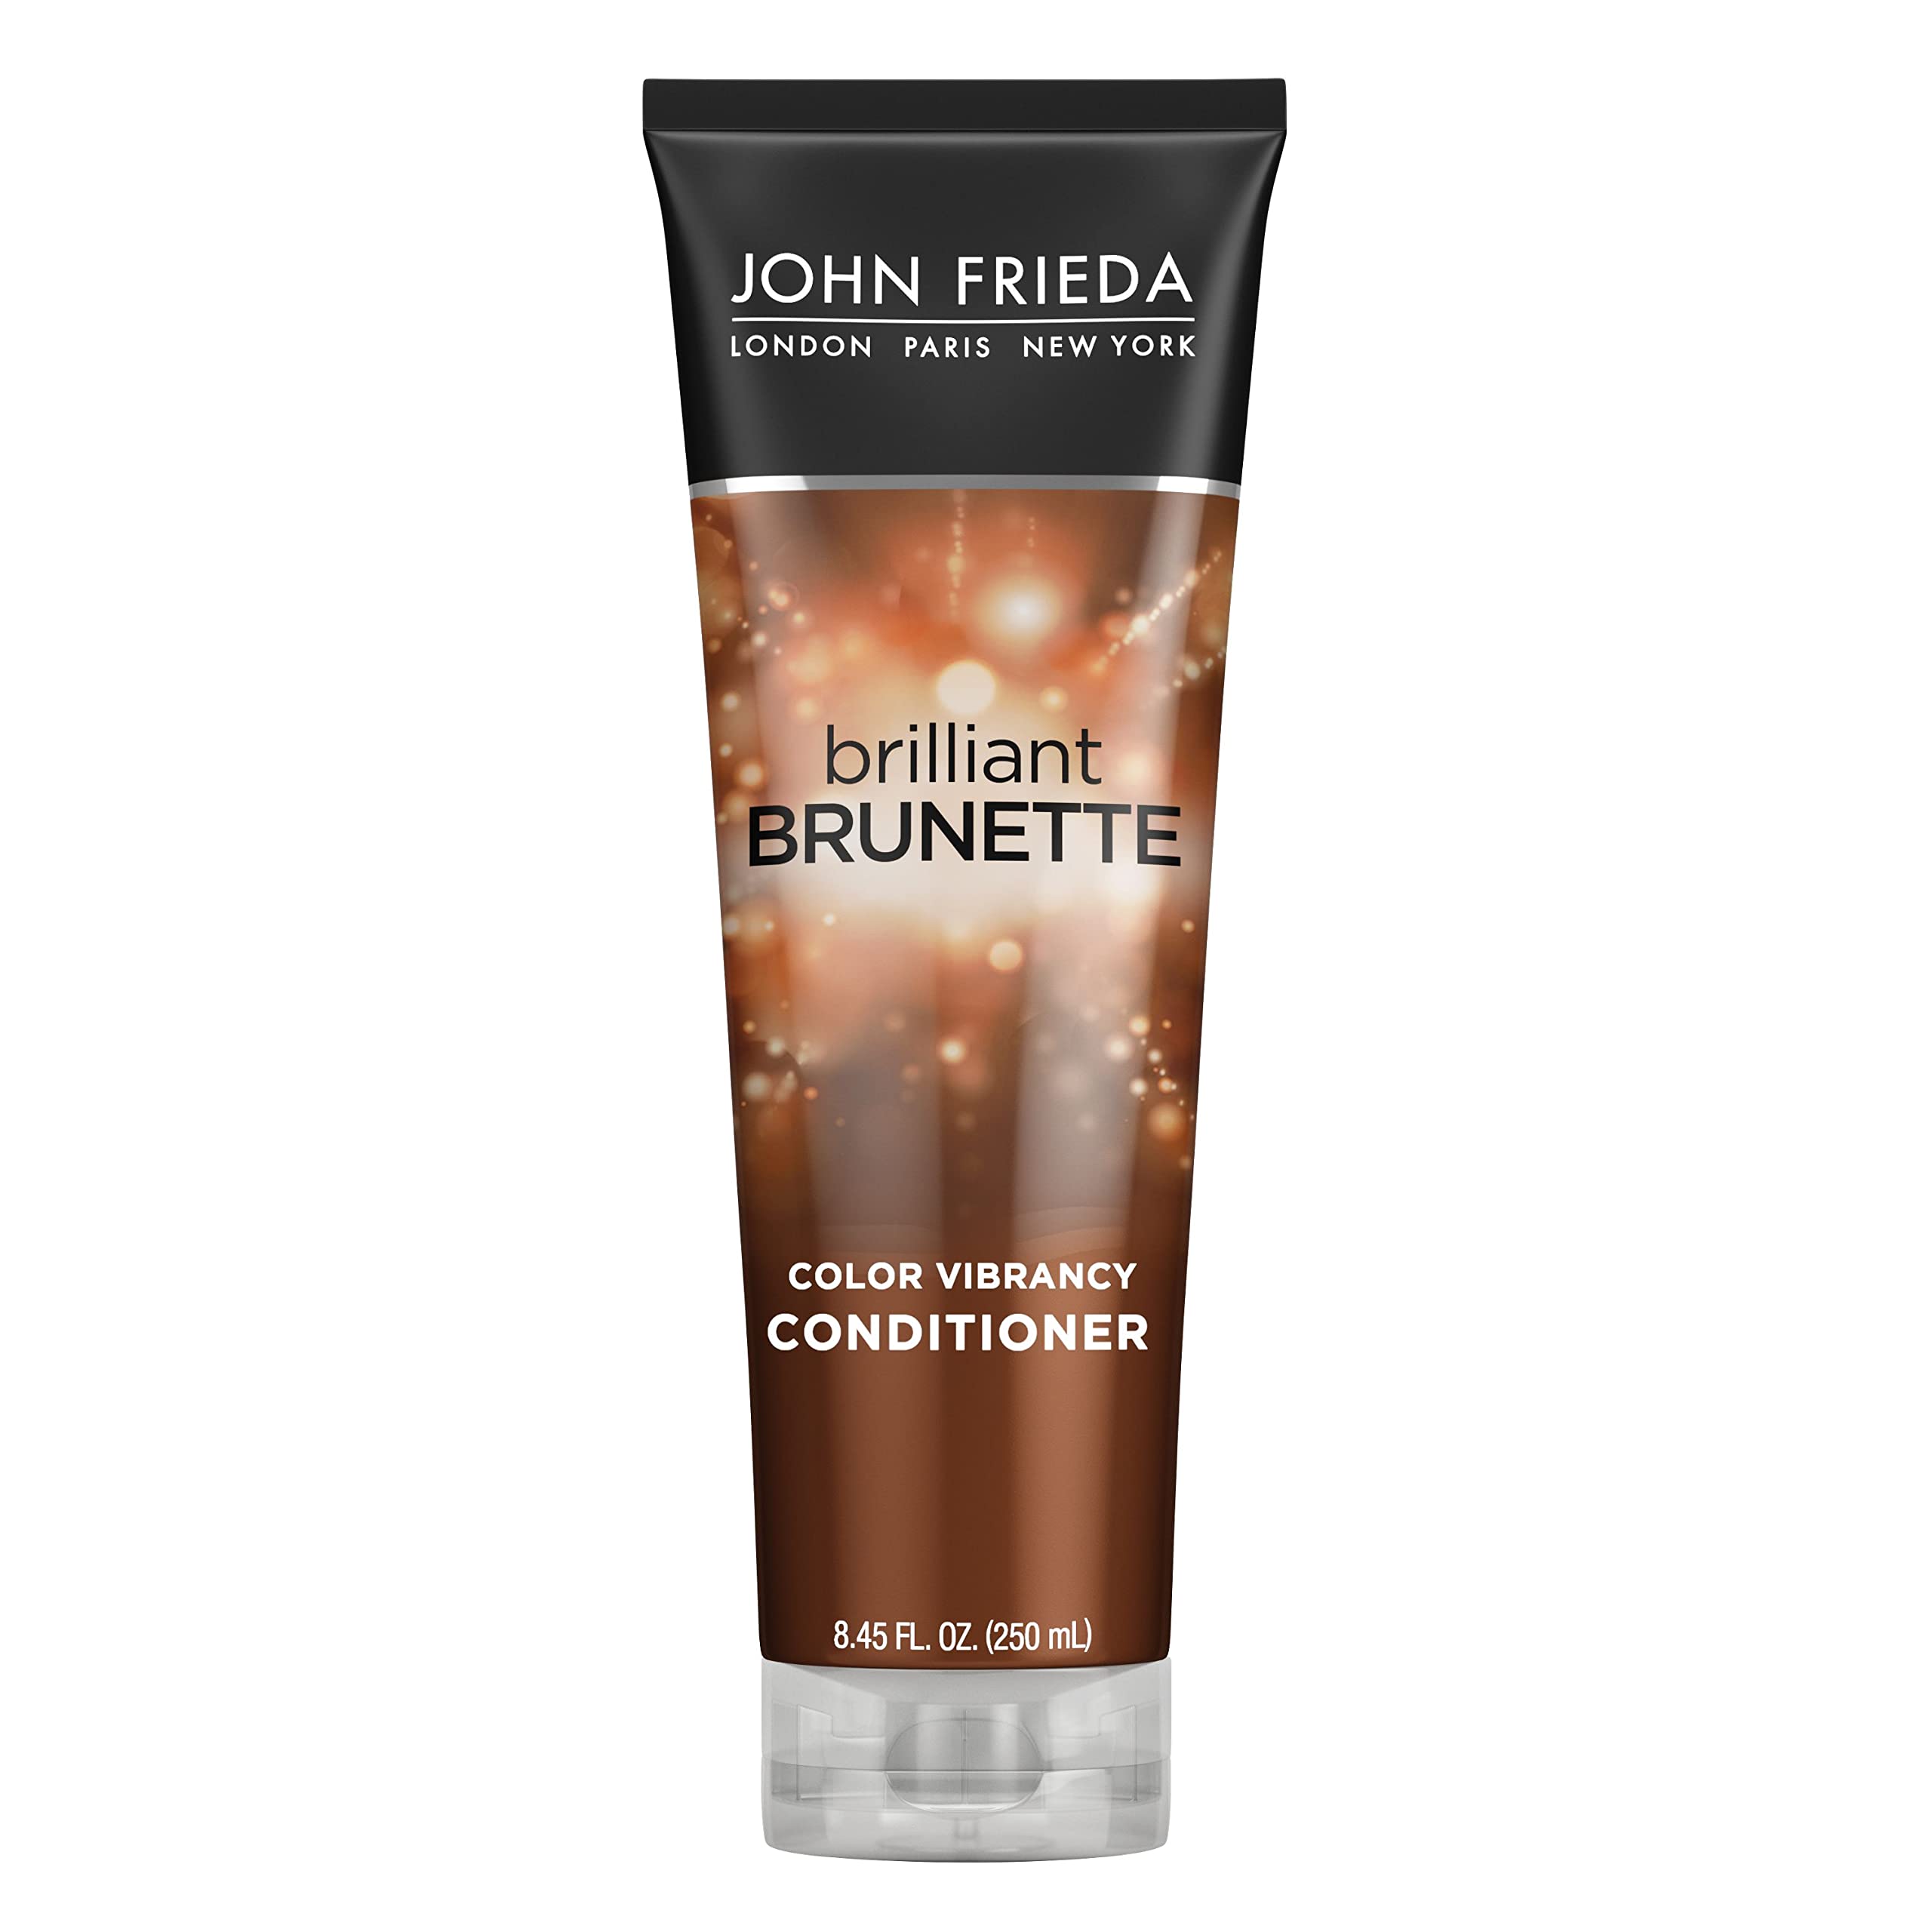 John Frieda Brilliant Brunette Multi-Tone Revealing Color Protecting Conditioner, for maintaining Color Treated Hair, Anti-Fade Conditioner, 8.45 oz, with Sweet Almond Oil and Crushed Pearls